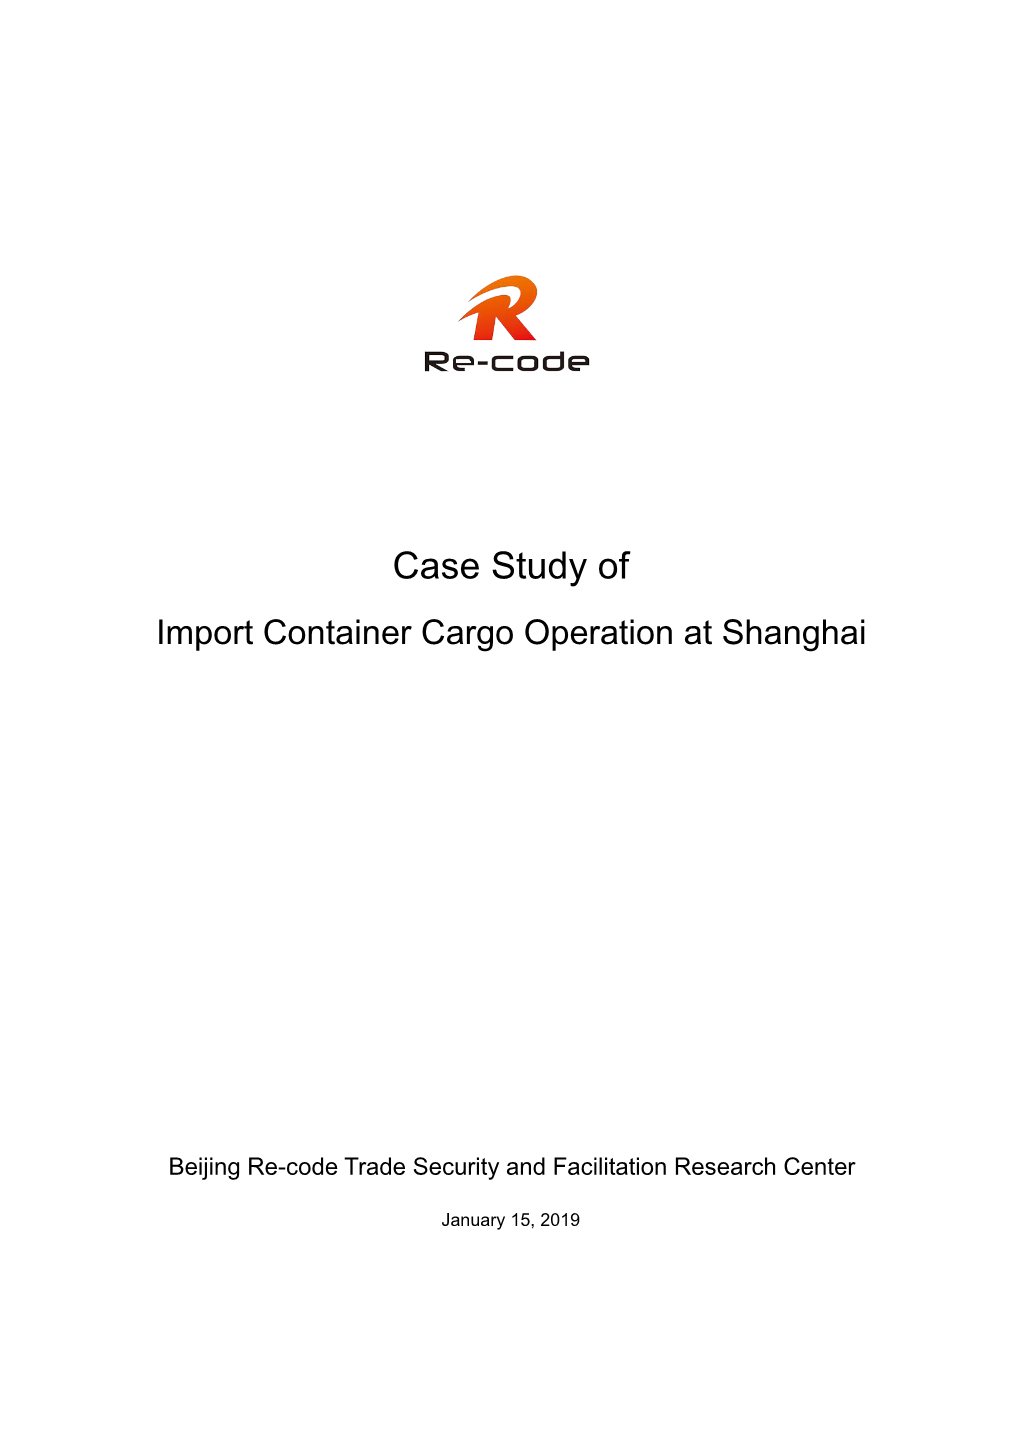 Case Study of Import Container Cargo Operation at Shanghai